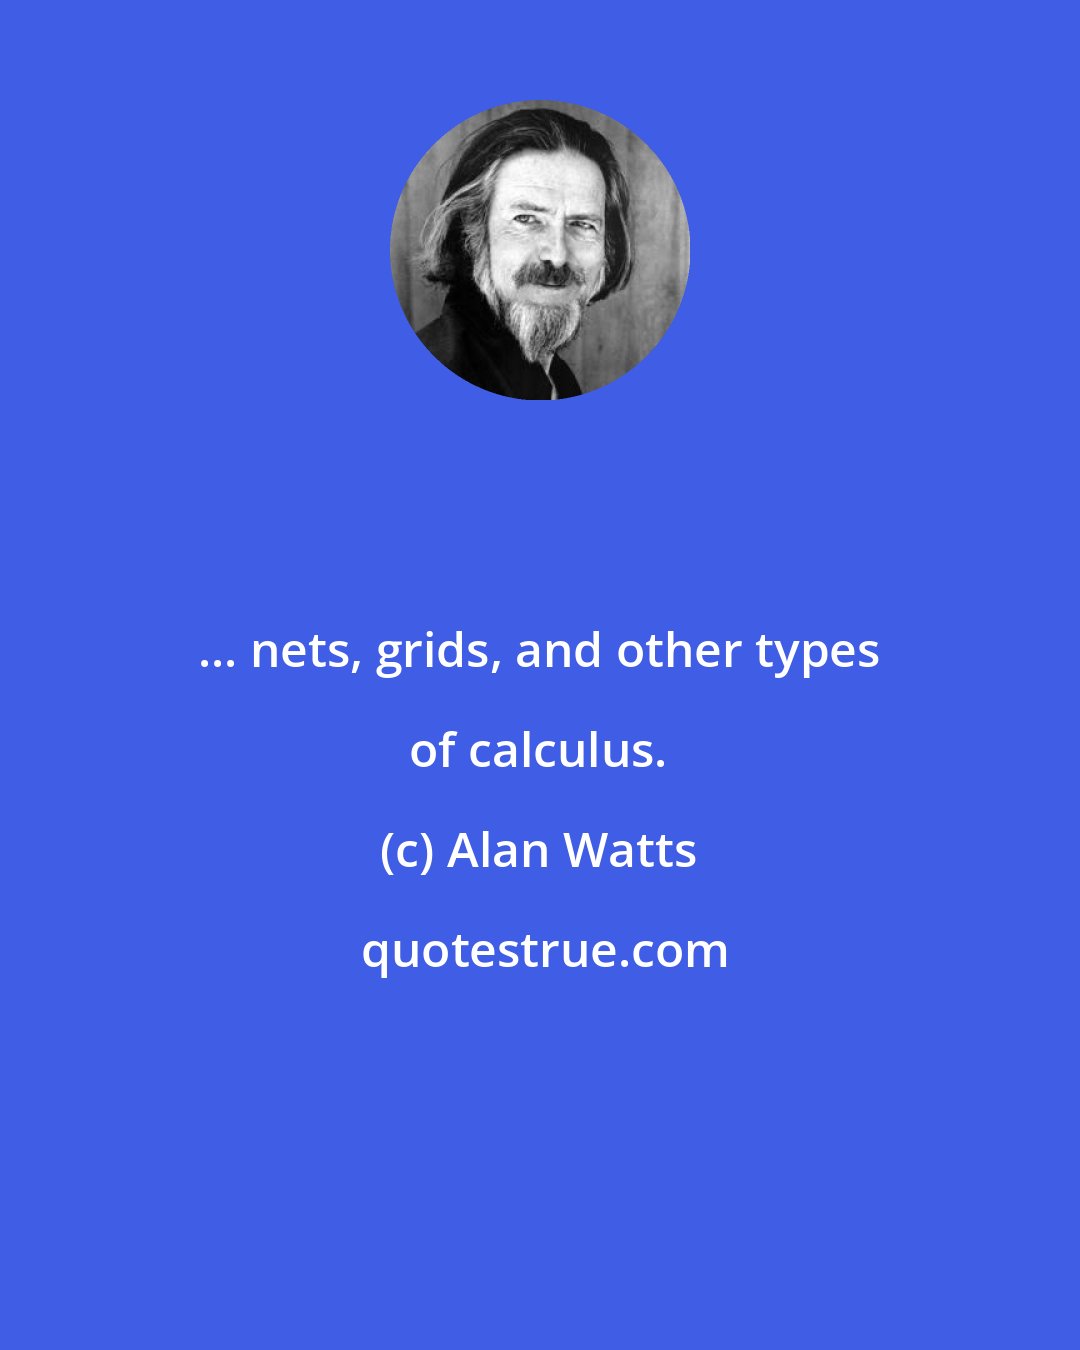 Alan Watts: ... nets, grids, and other types of calculus.